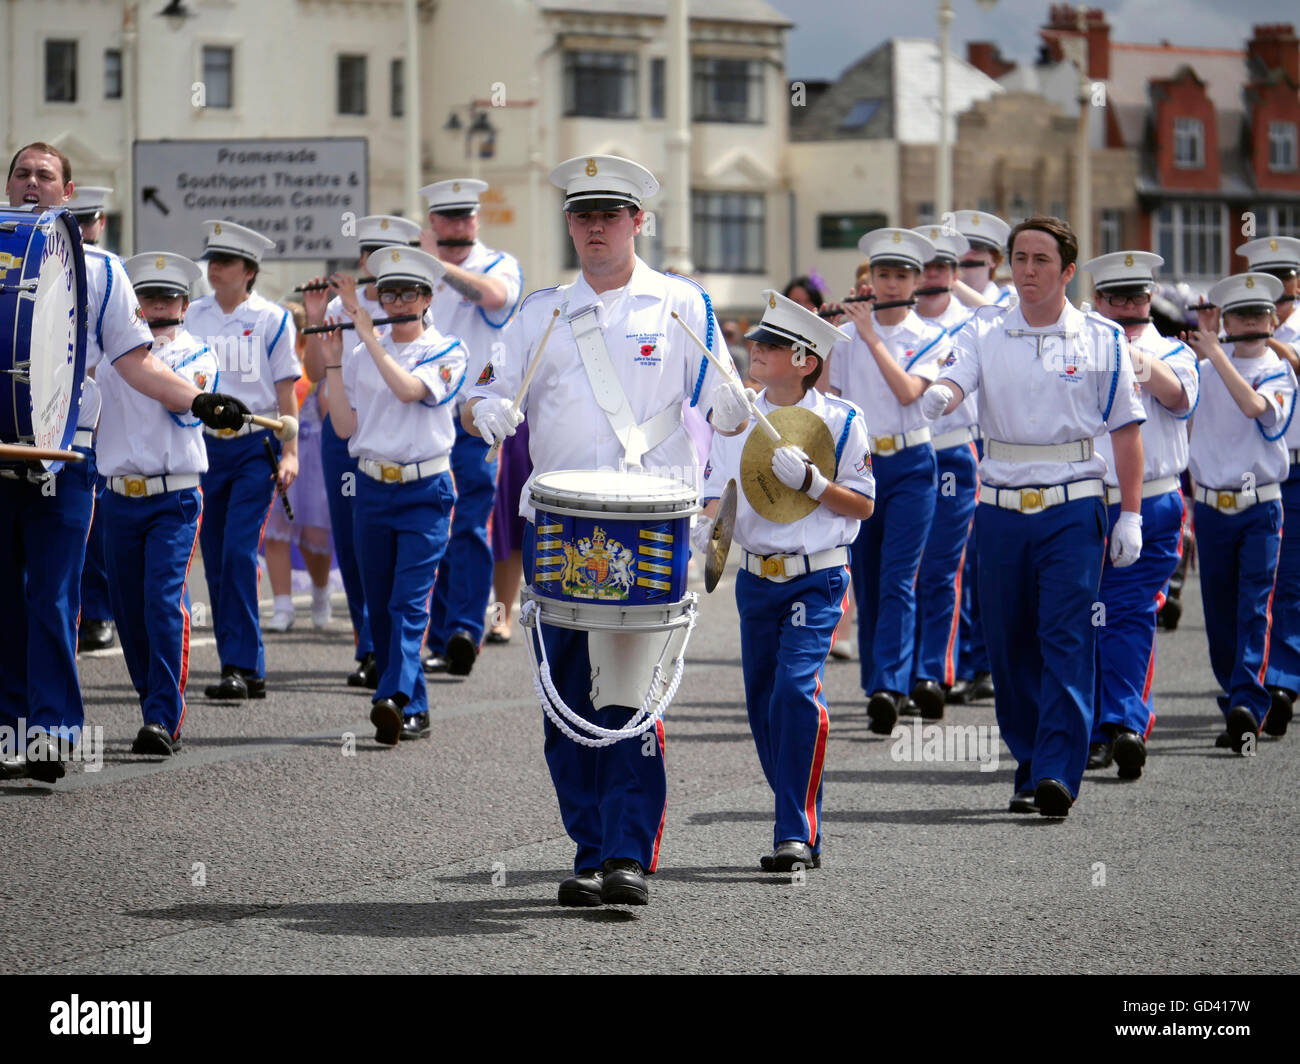 Southport, Merseyside, UK. 12th July, 2016. The Orange Lodge Parade marching through Southport. Merseyside. 12 July 2016. The parade's history goes back over three centuries to the Battle of the Boyne in 1690 when King William III of Orange defeated his rival King James II.This year's walk is also in memory of the 100th anniversary of the Battle of the Somme. Credit:  ALAN EDWARDS/Alamy Live News Stock Photo